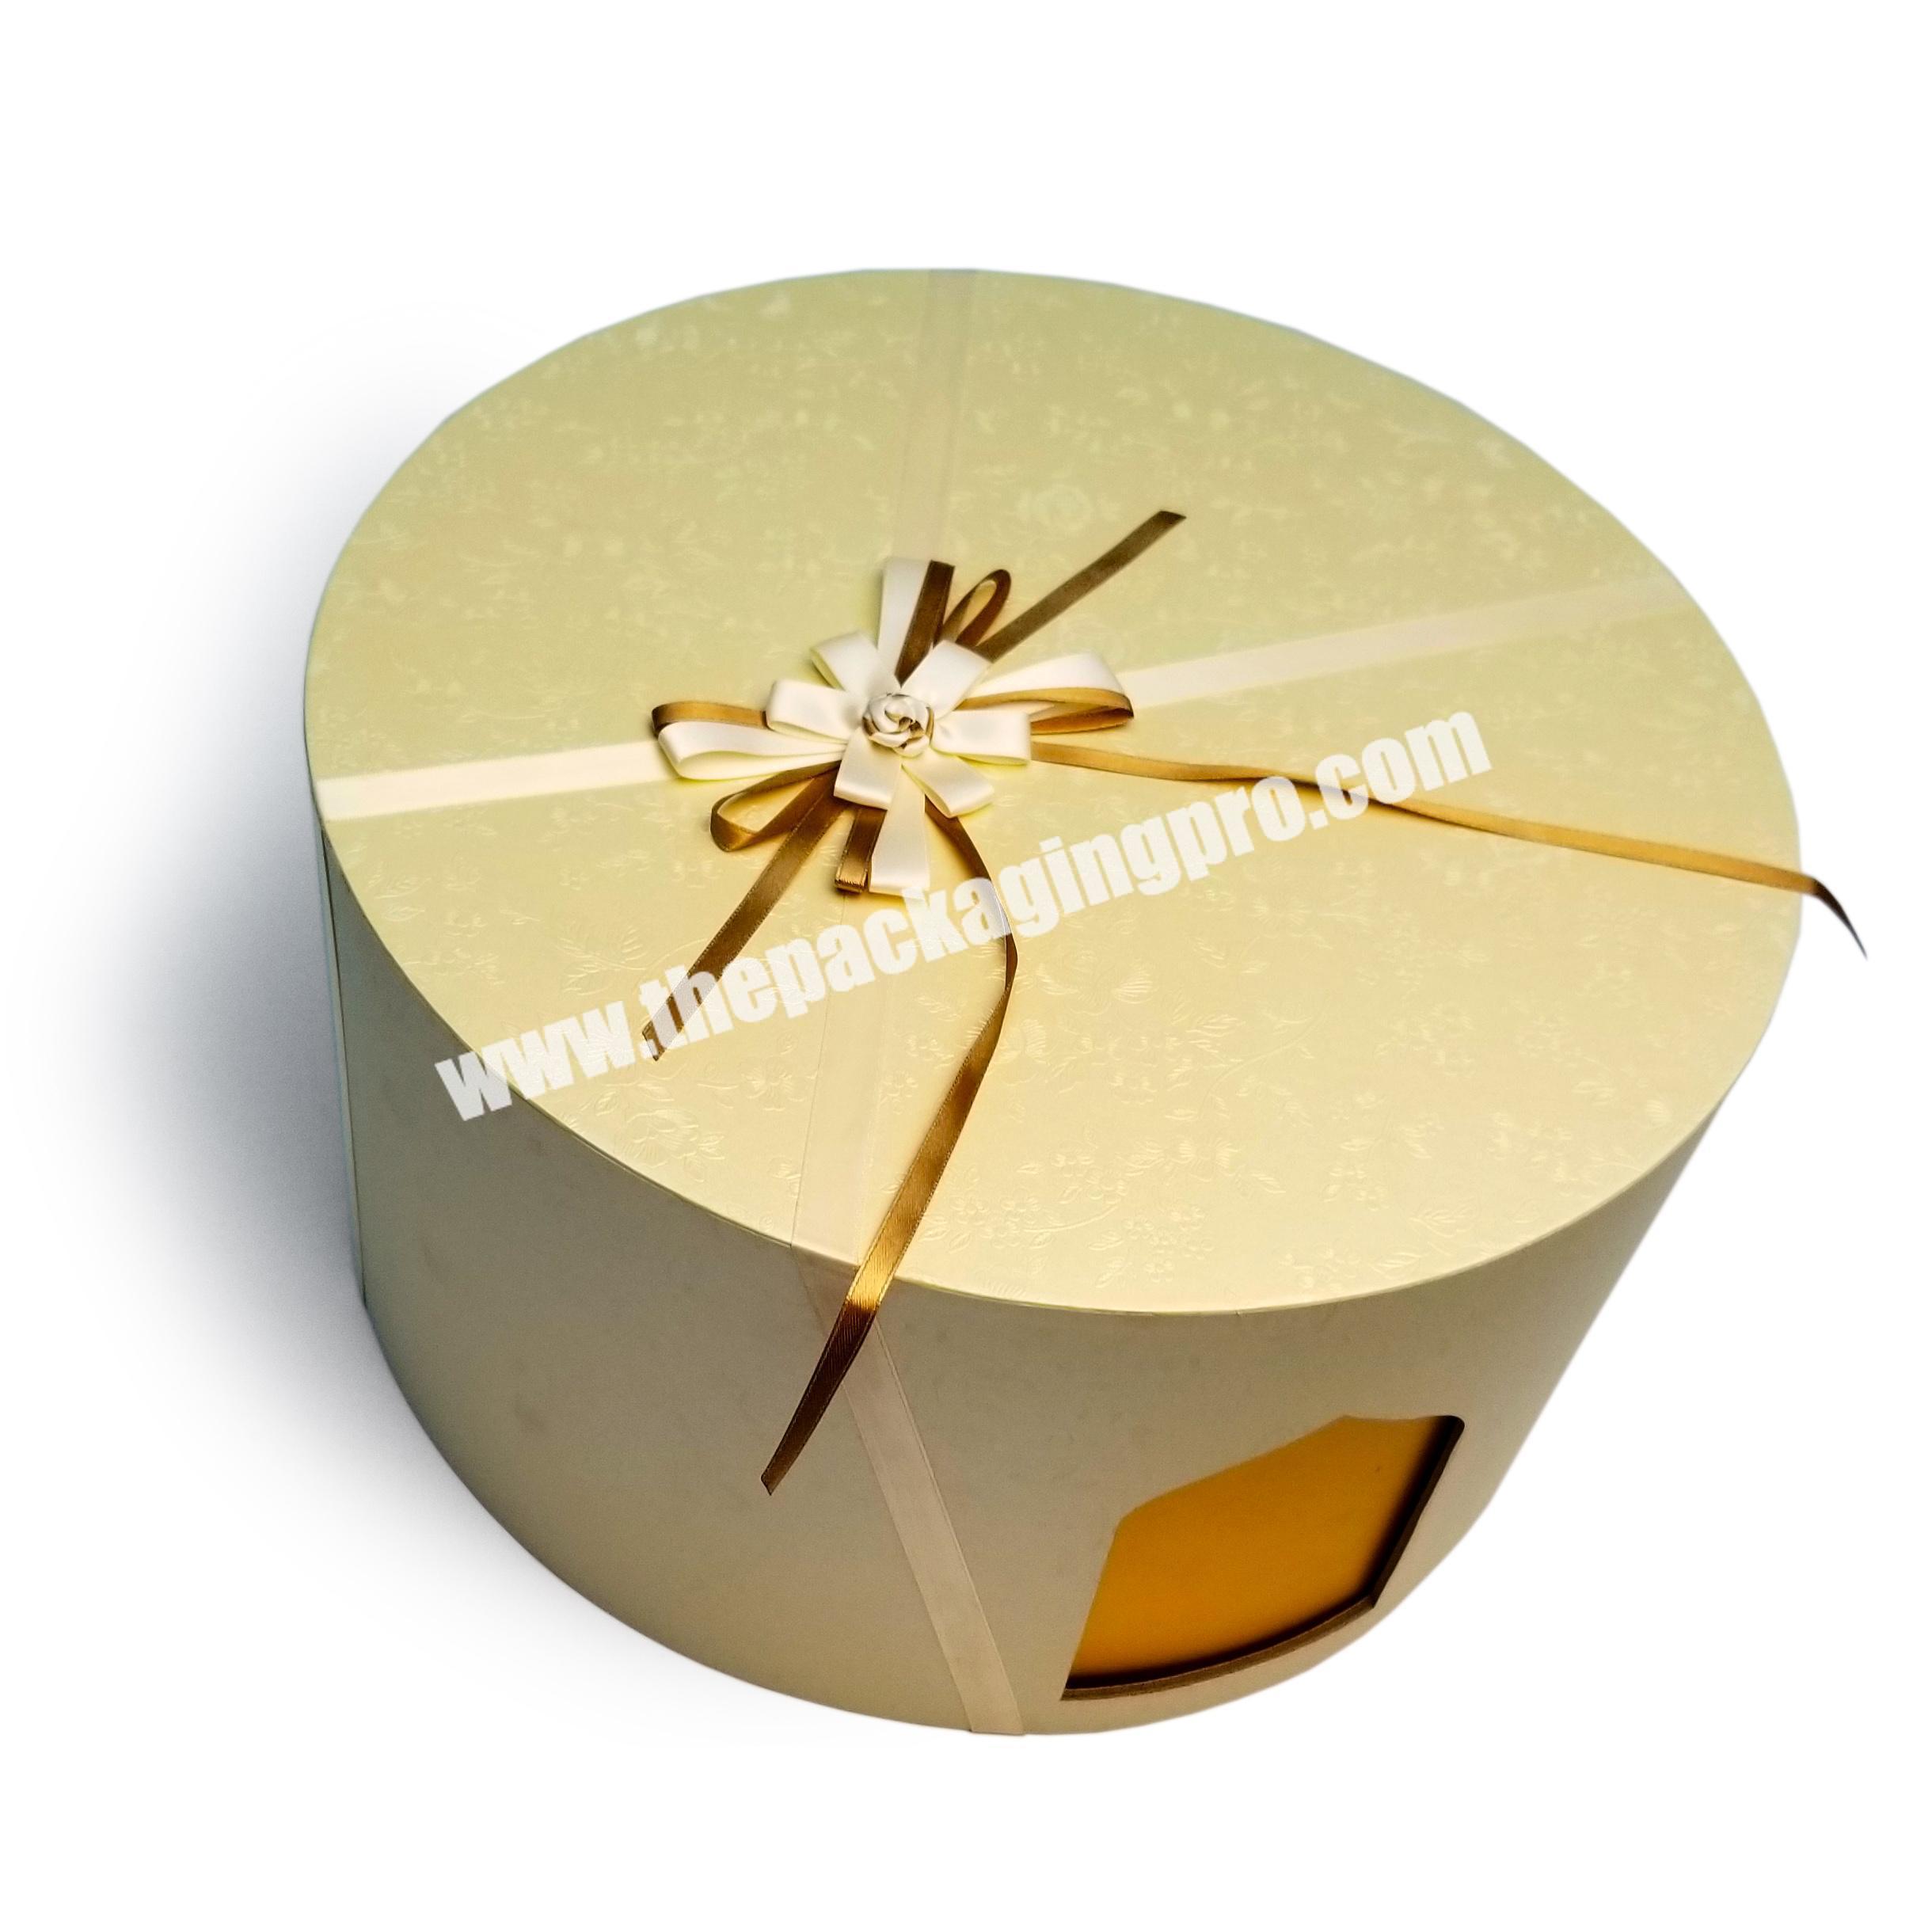 Huge round gift box double layers round shape gold cardboard hat box